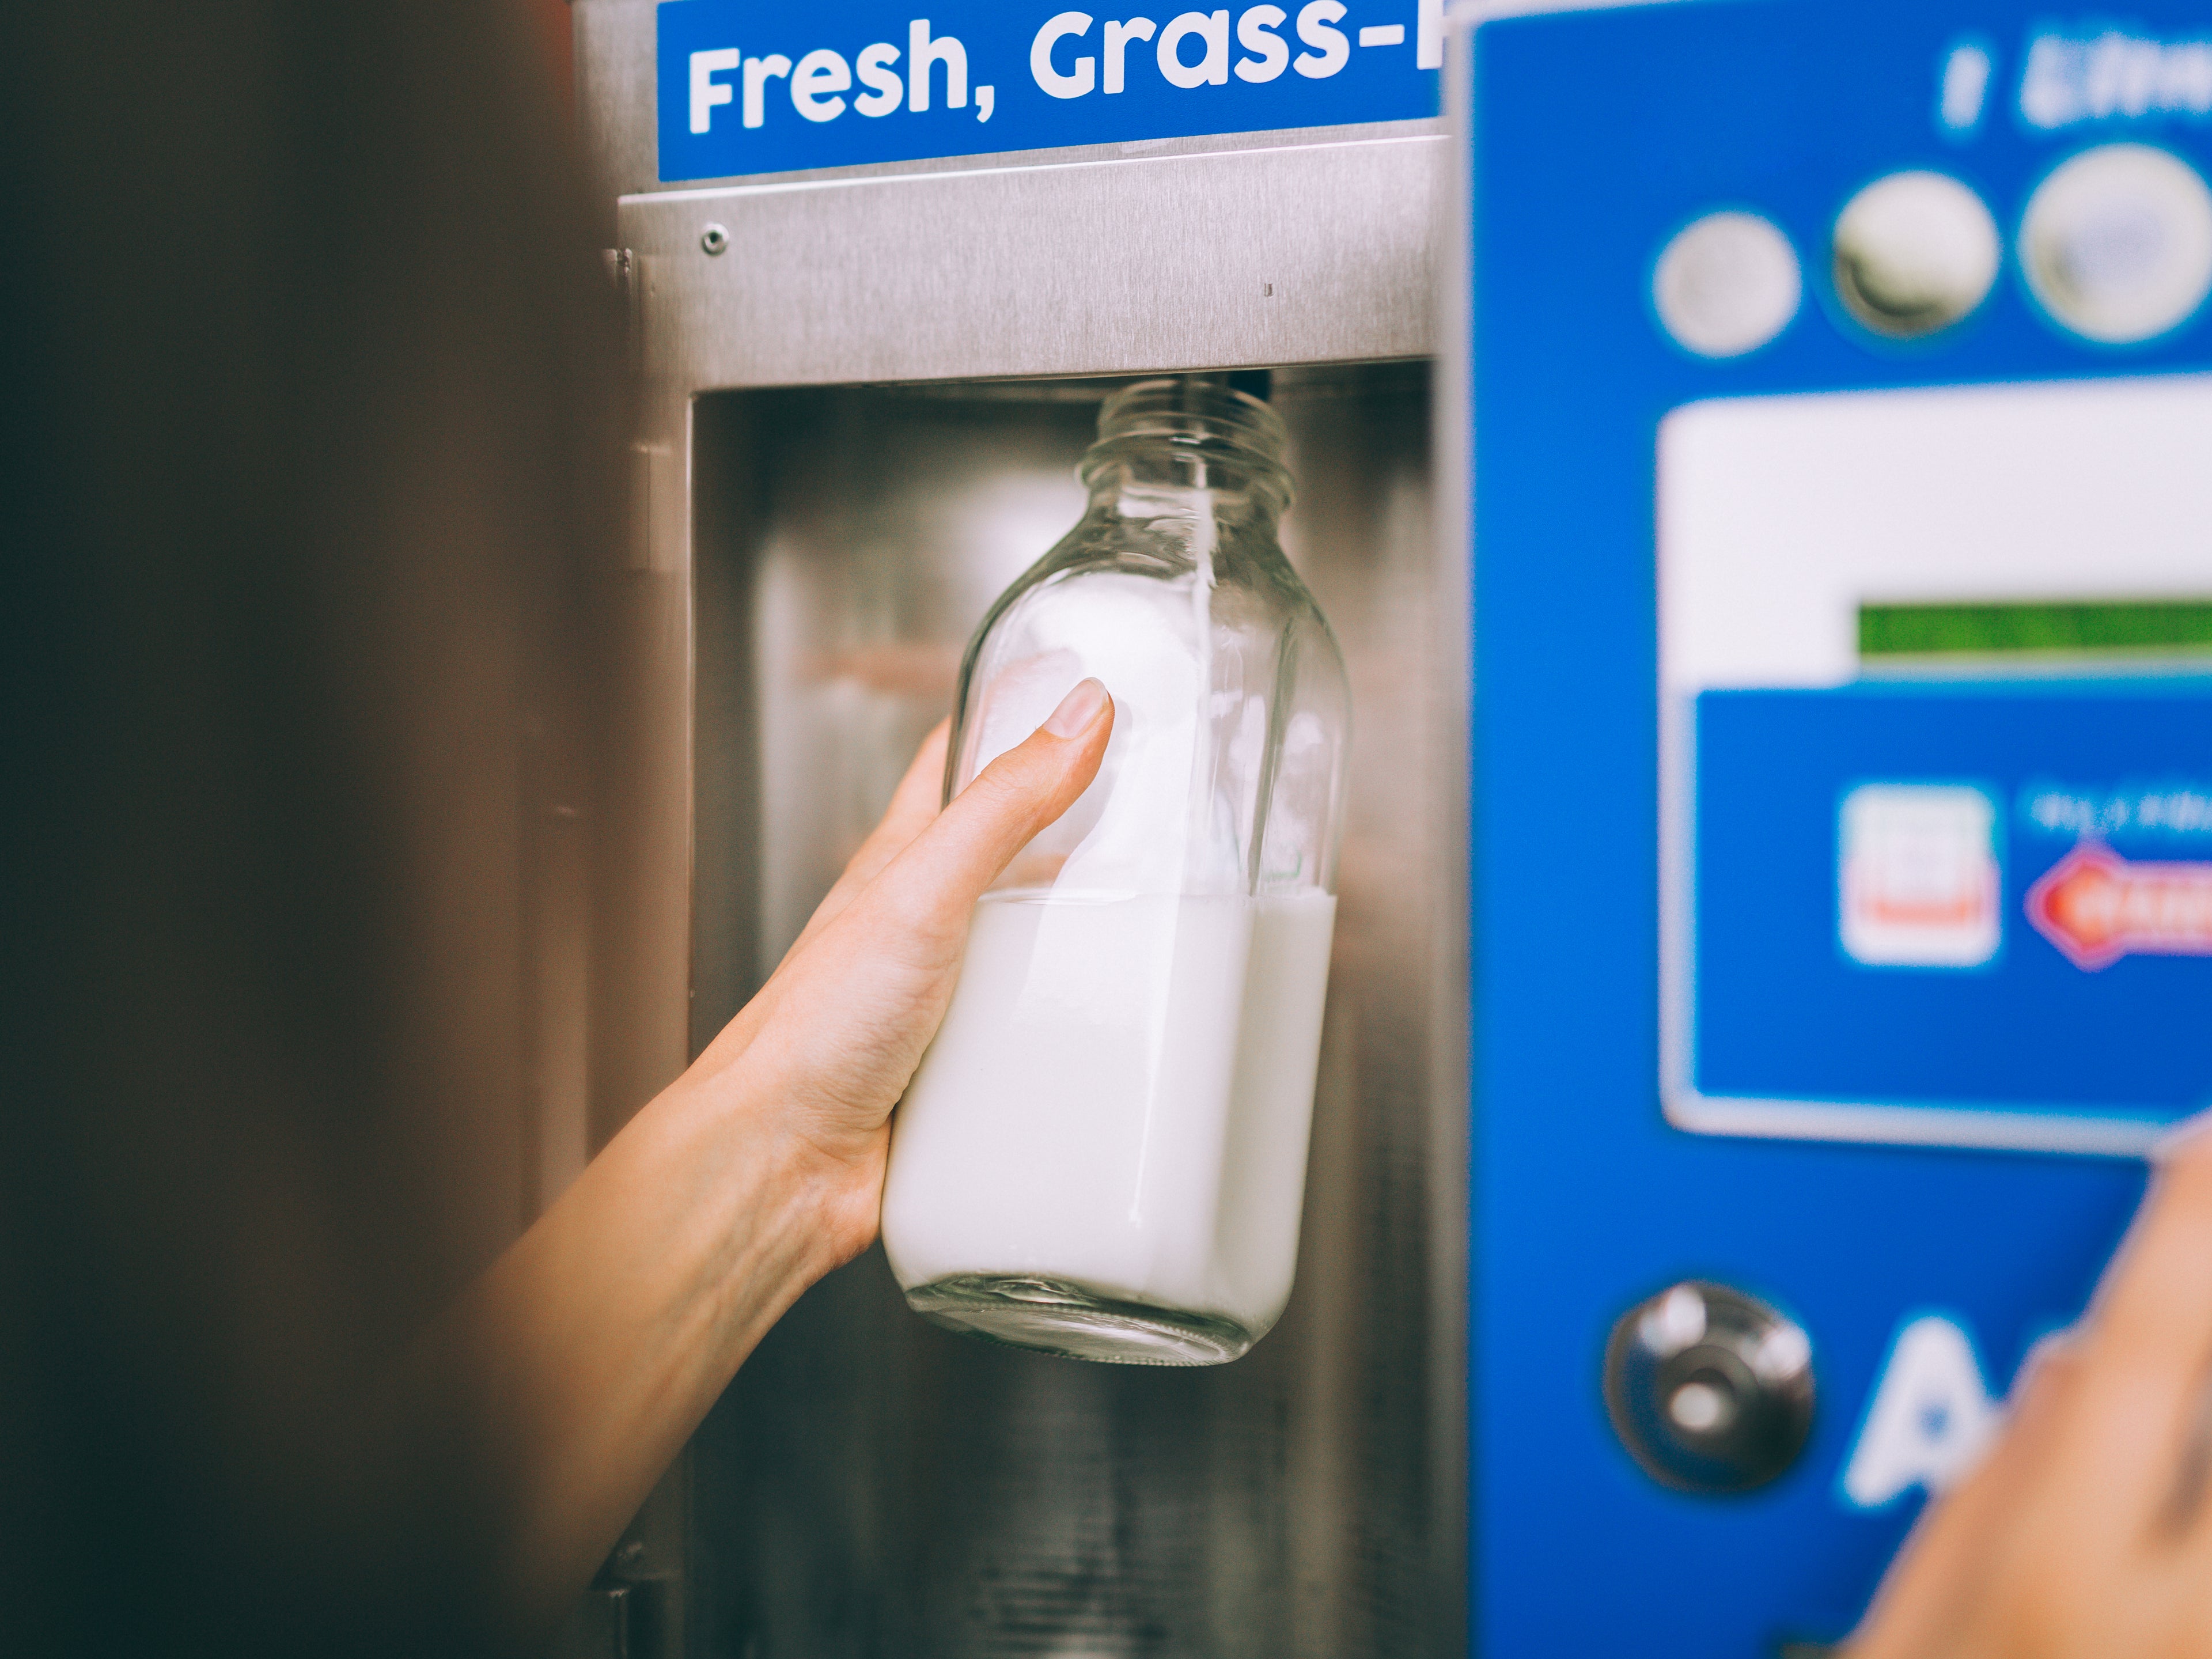 A person fills up their bottle at a self-serve milk on tap dispenser.